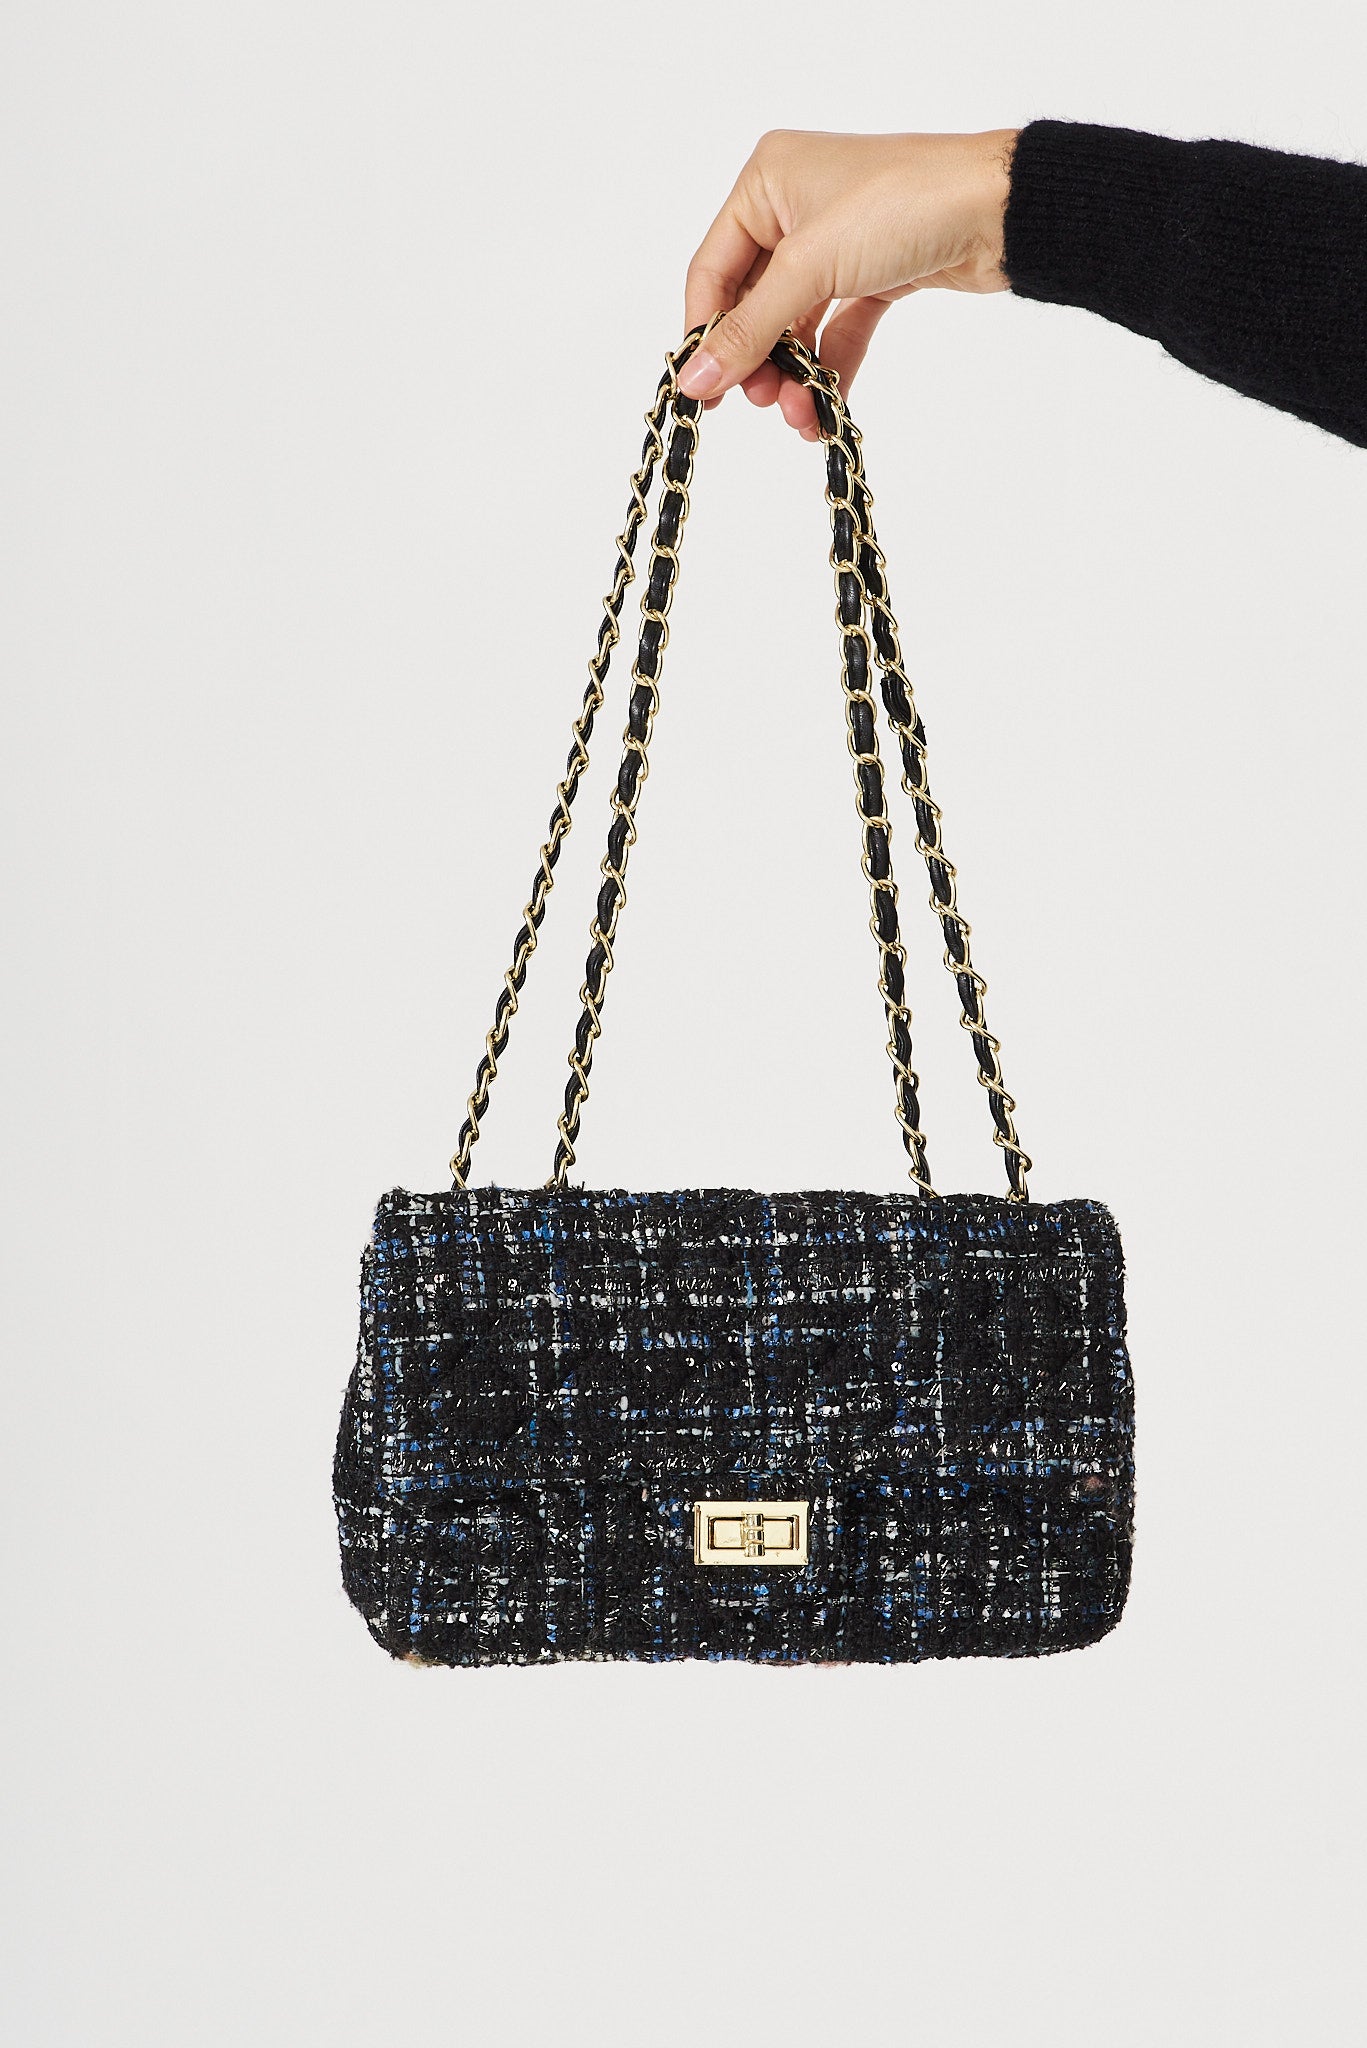 August + Delilah Louise Bag In Navy And Black Tweed – St Frock